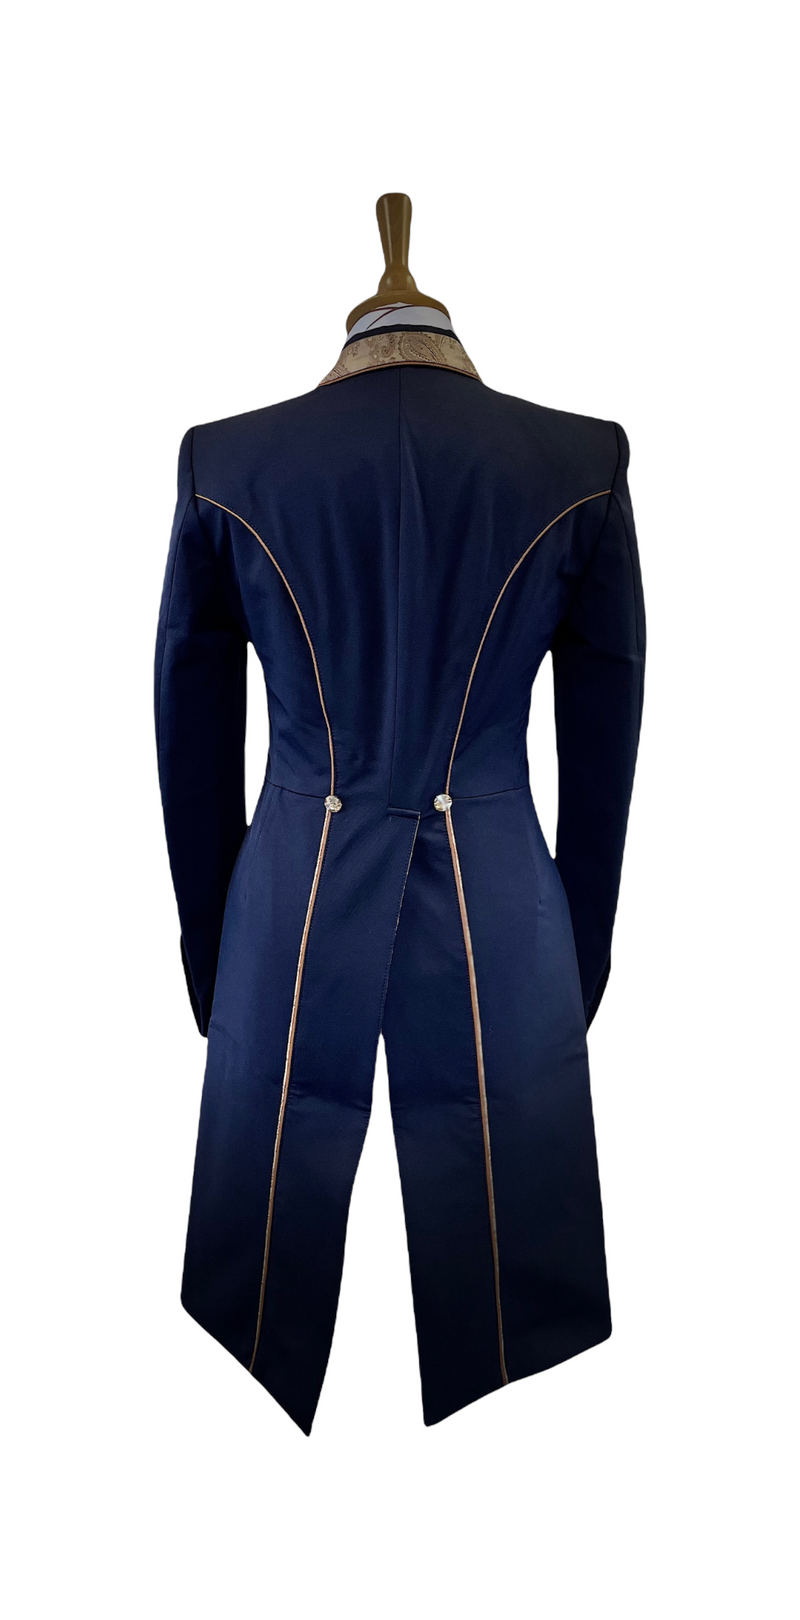 Ladies Isabell Dressage Tailcoat, Navy & Copper Paisley Trim